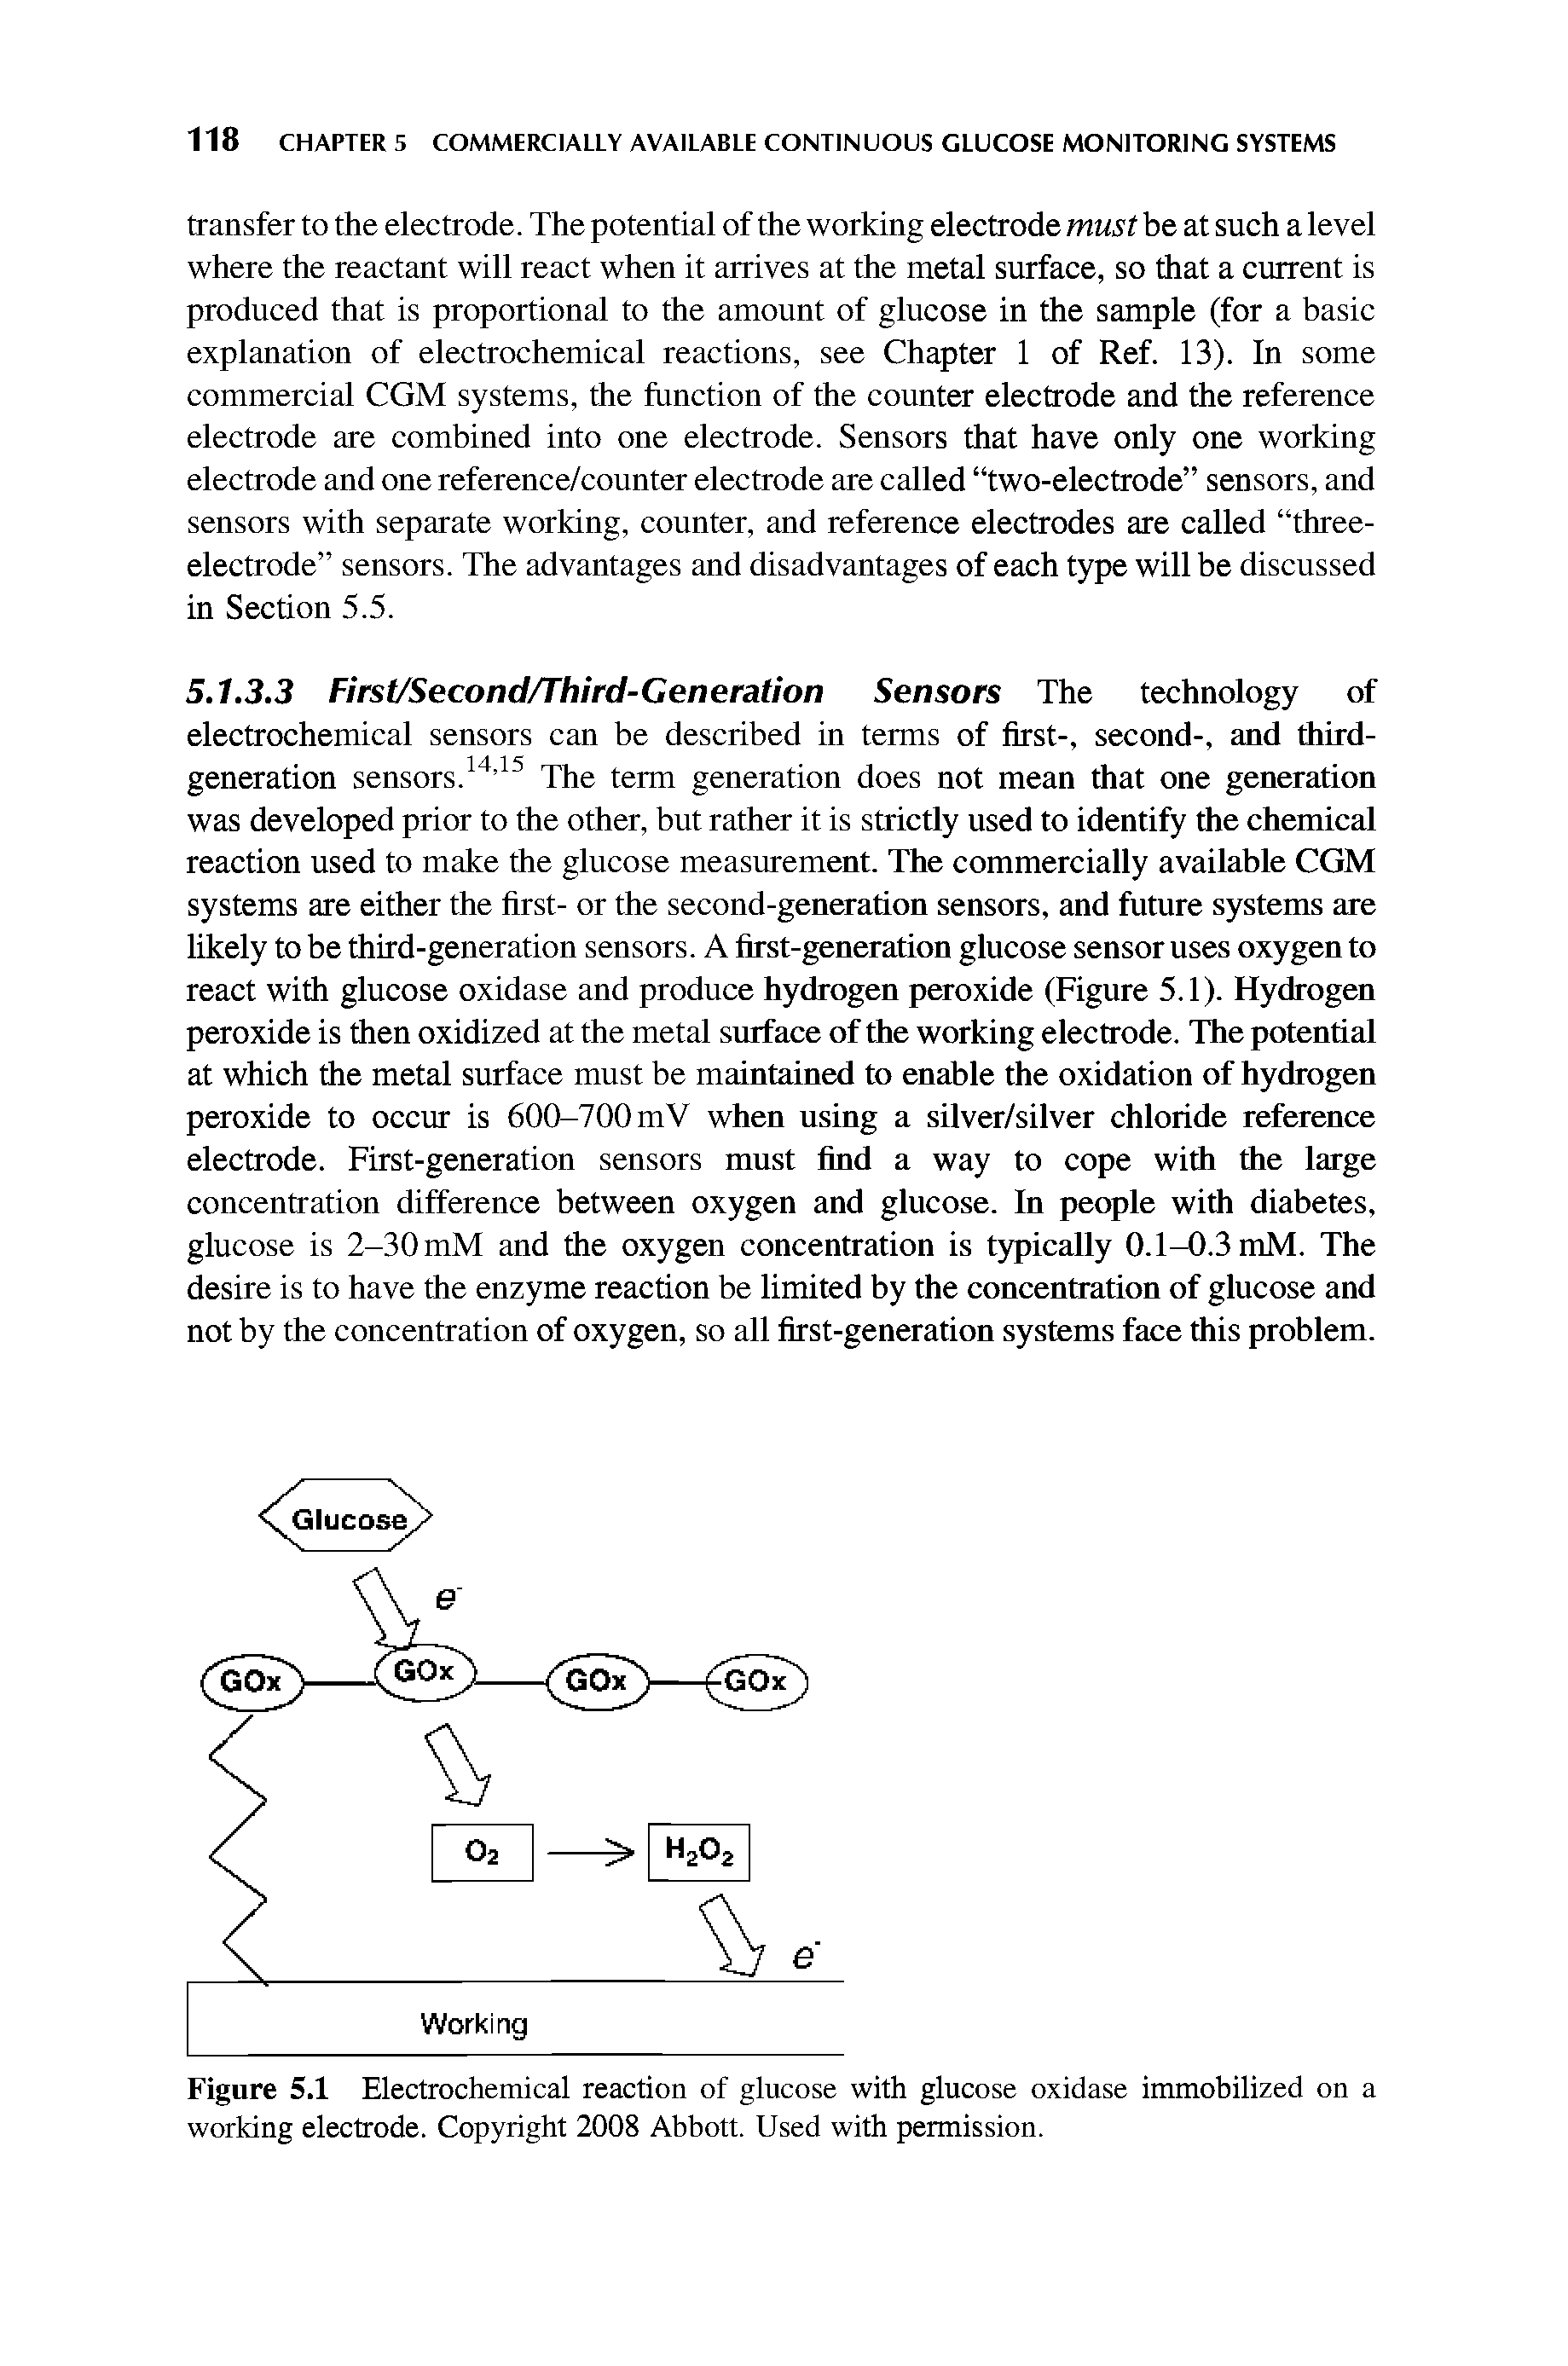 Figure 5.1 Electrochemical reaction of glucose with glucose oxidase immobilized on a working electrode. Copyright 2008 Abbott. Used with permission.